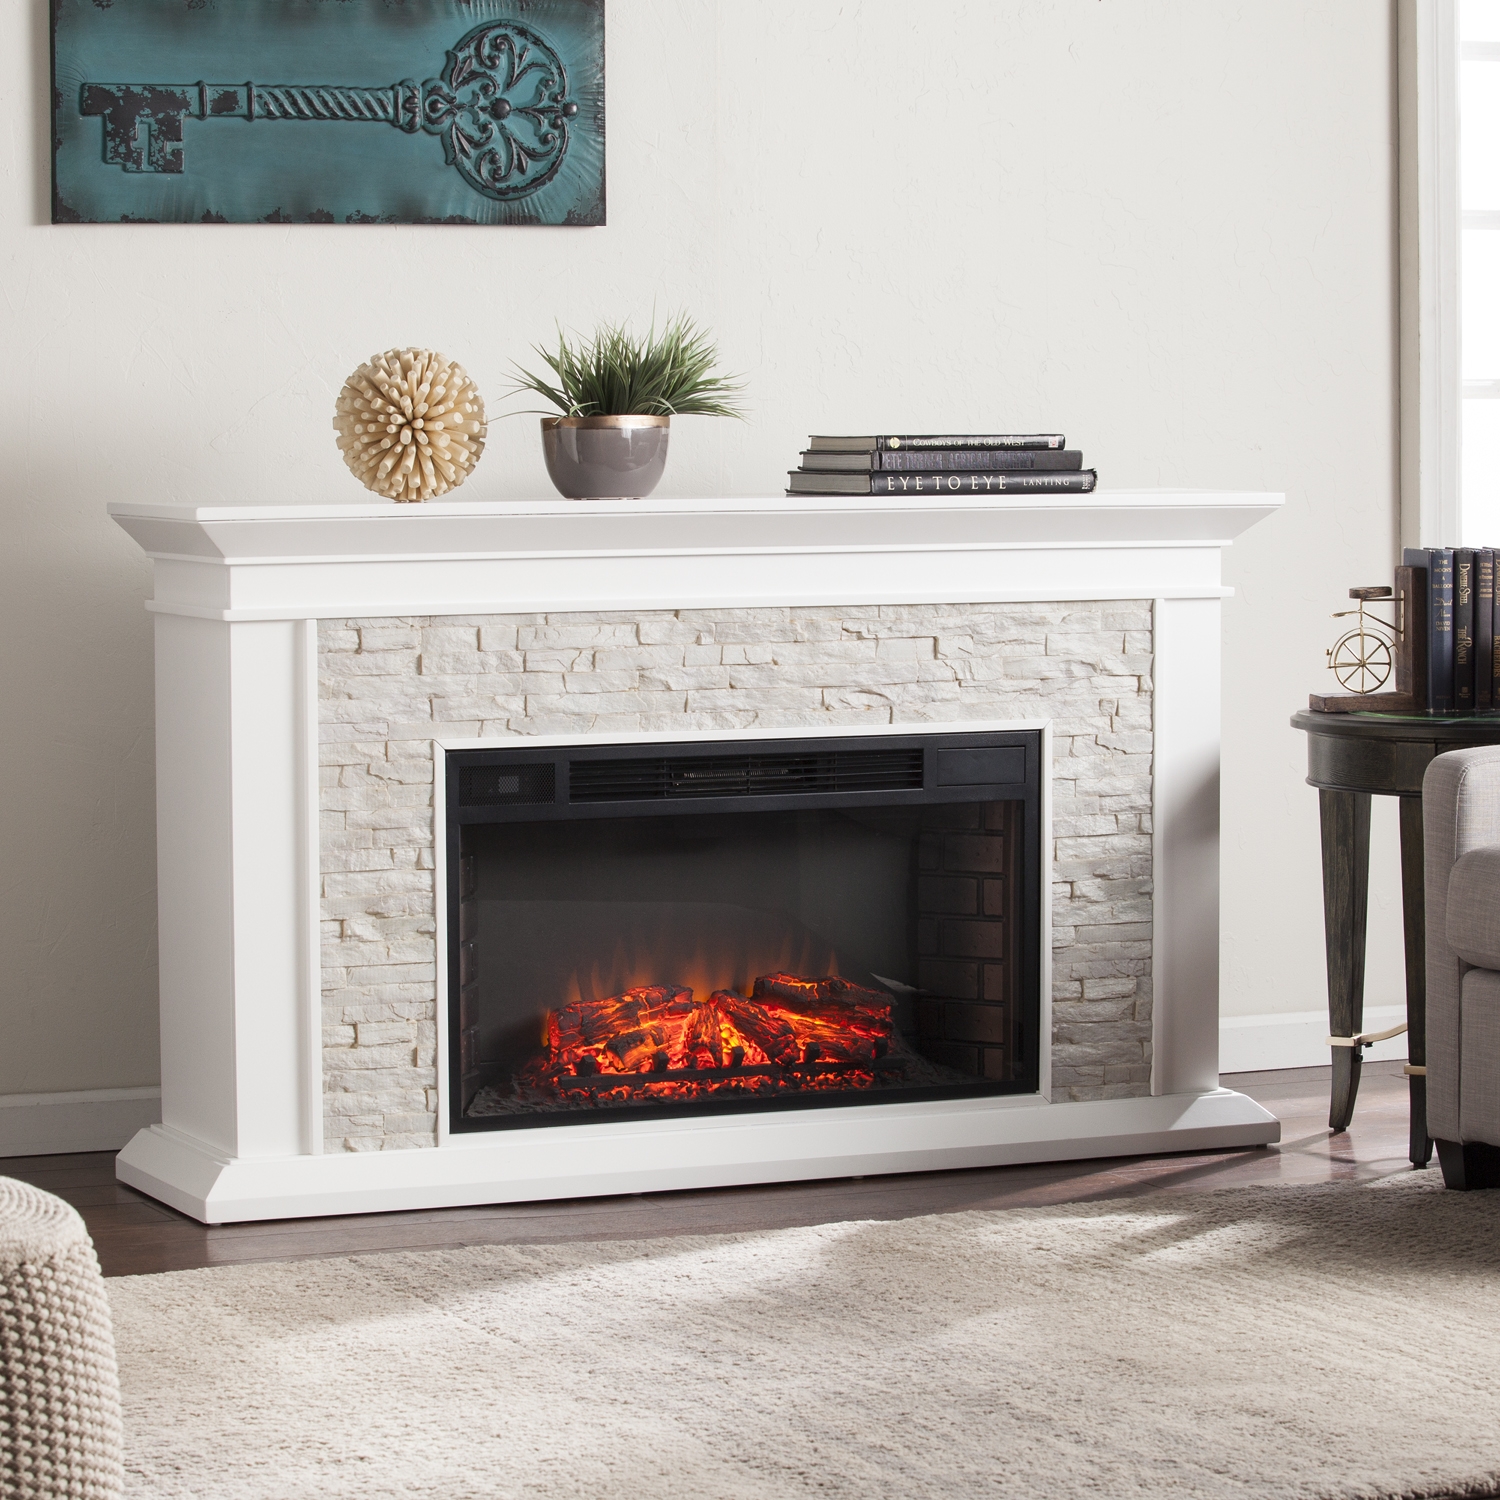 Kerns Fireplace Awesome White Fireplace Electric Charming Fireplace